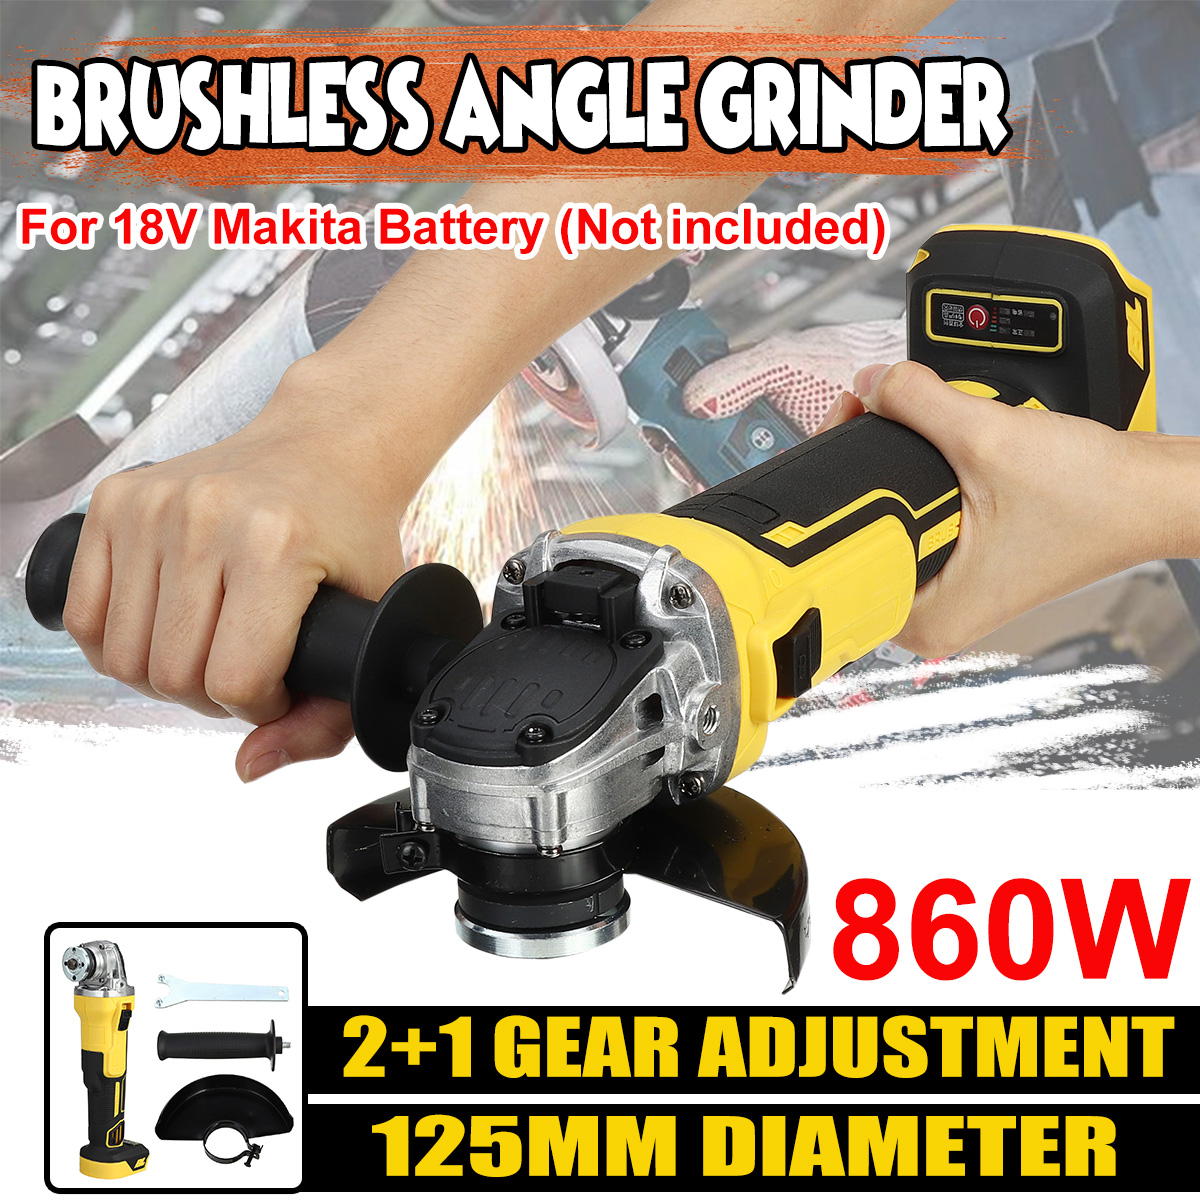 125mm-Brushless-Rechargeable-Angle-Grinder-Electric-Polishing-Cutting-Machine-For-Makita-18V-Battery-1751312-1